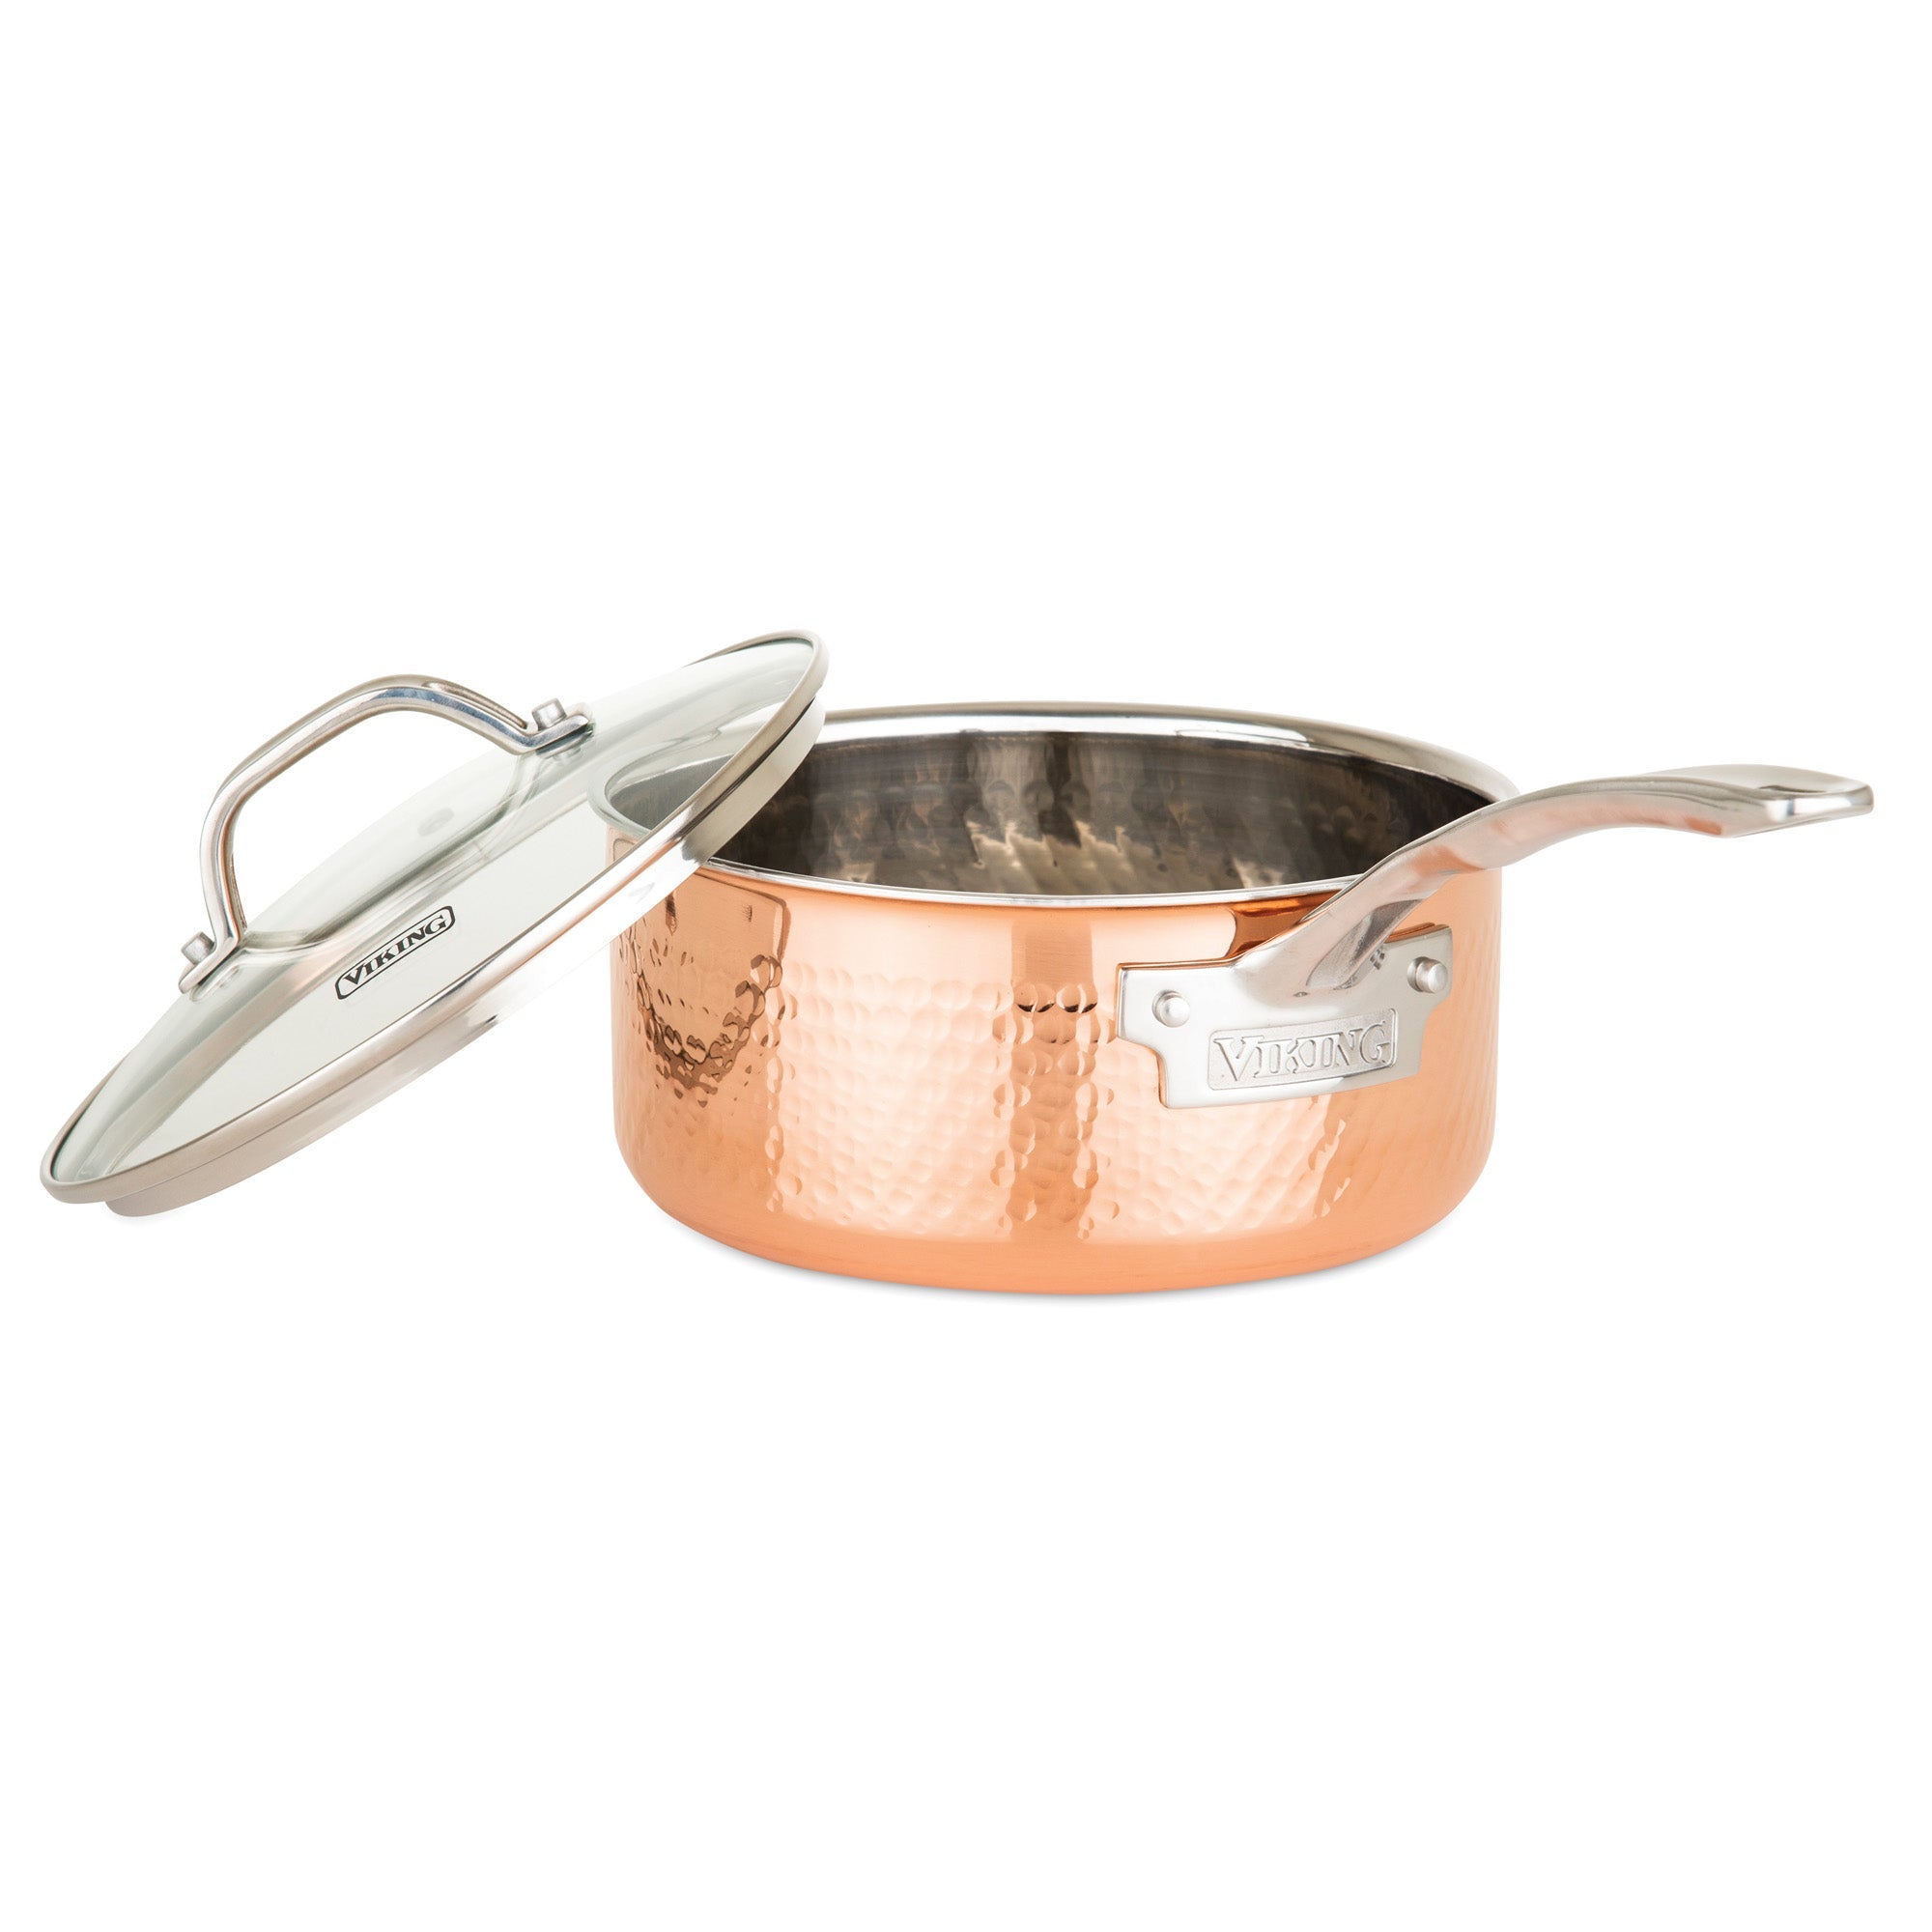 Red Copper 10-Piece Cookware Set